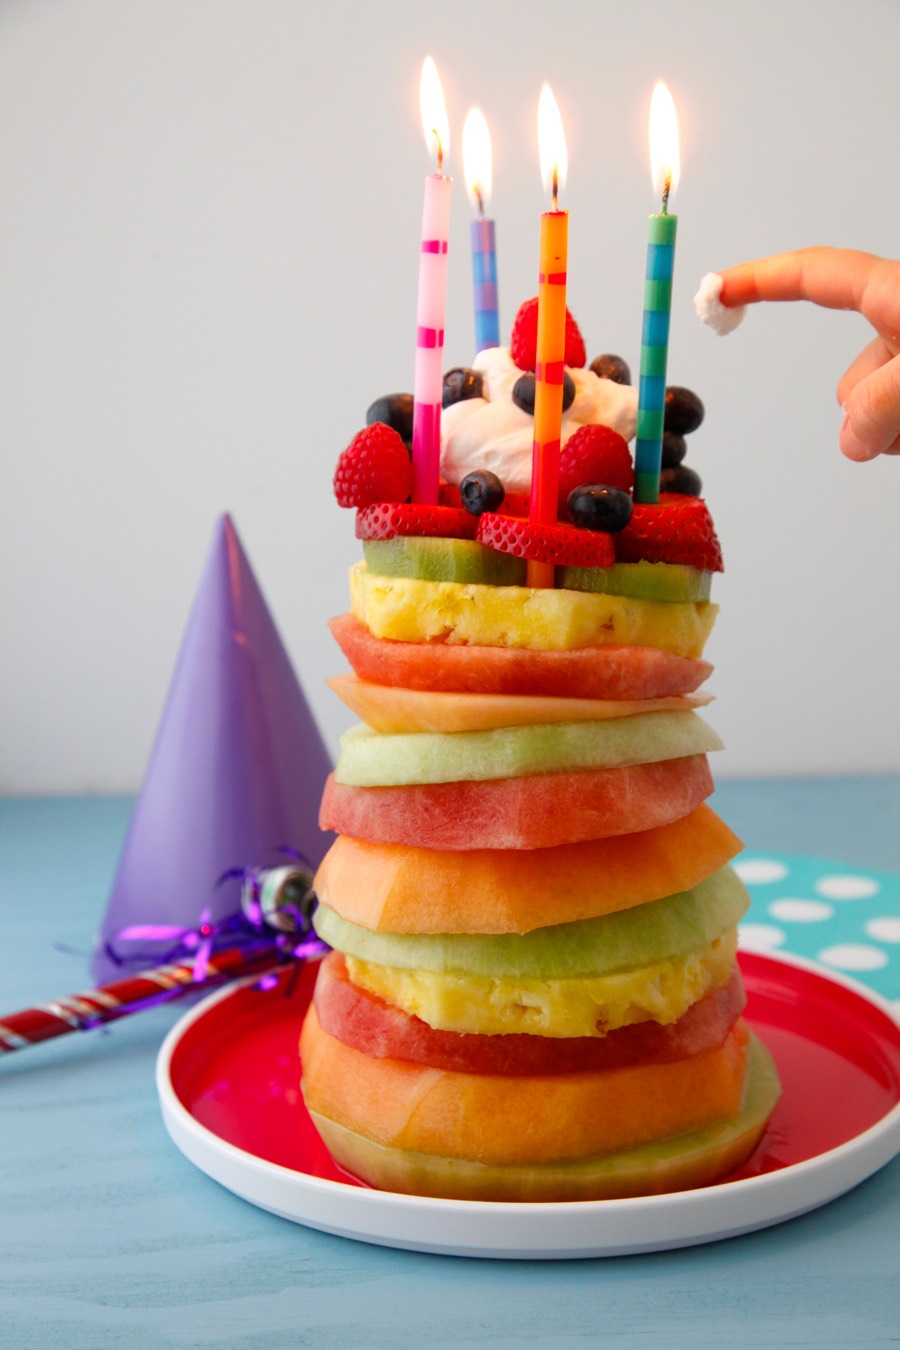 Fruit Tower Healthy Birthday Cake from Weelicious